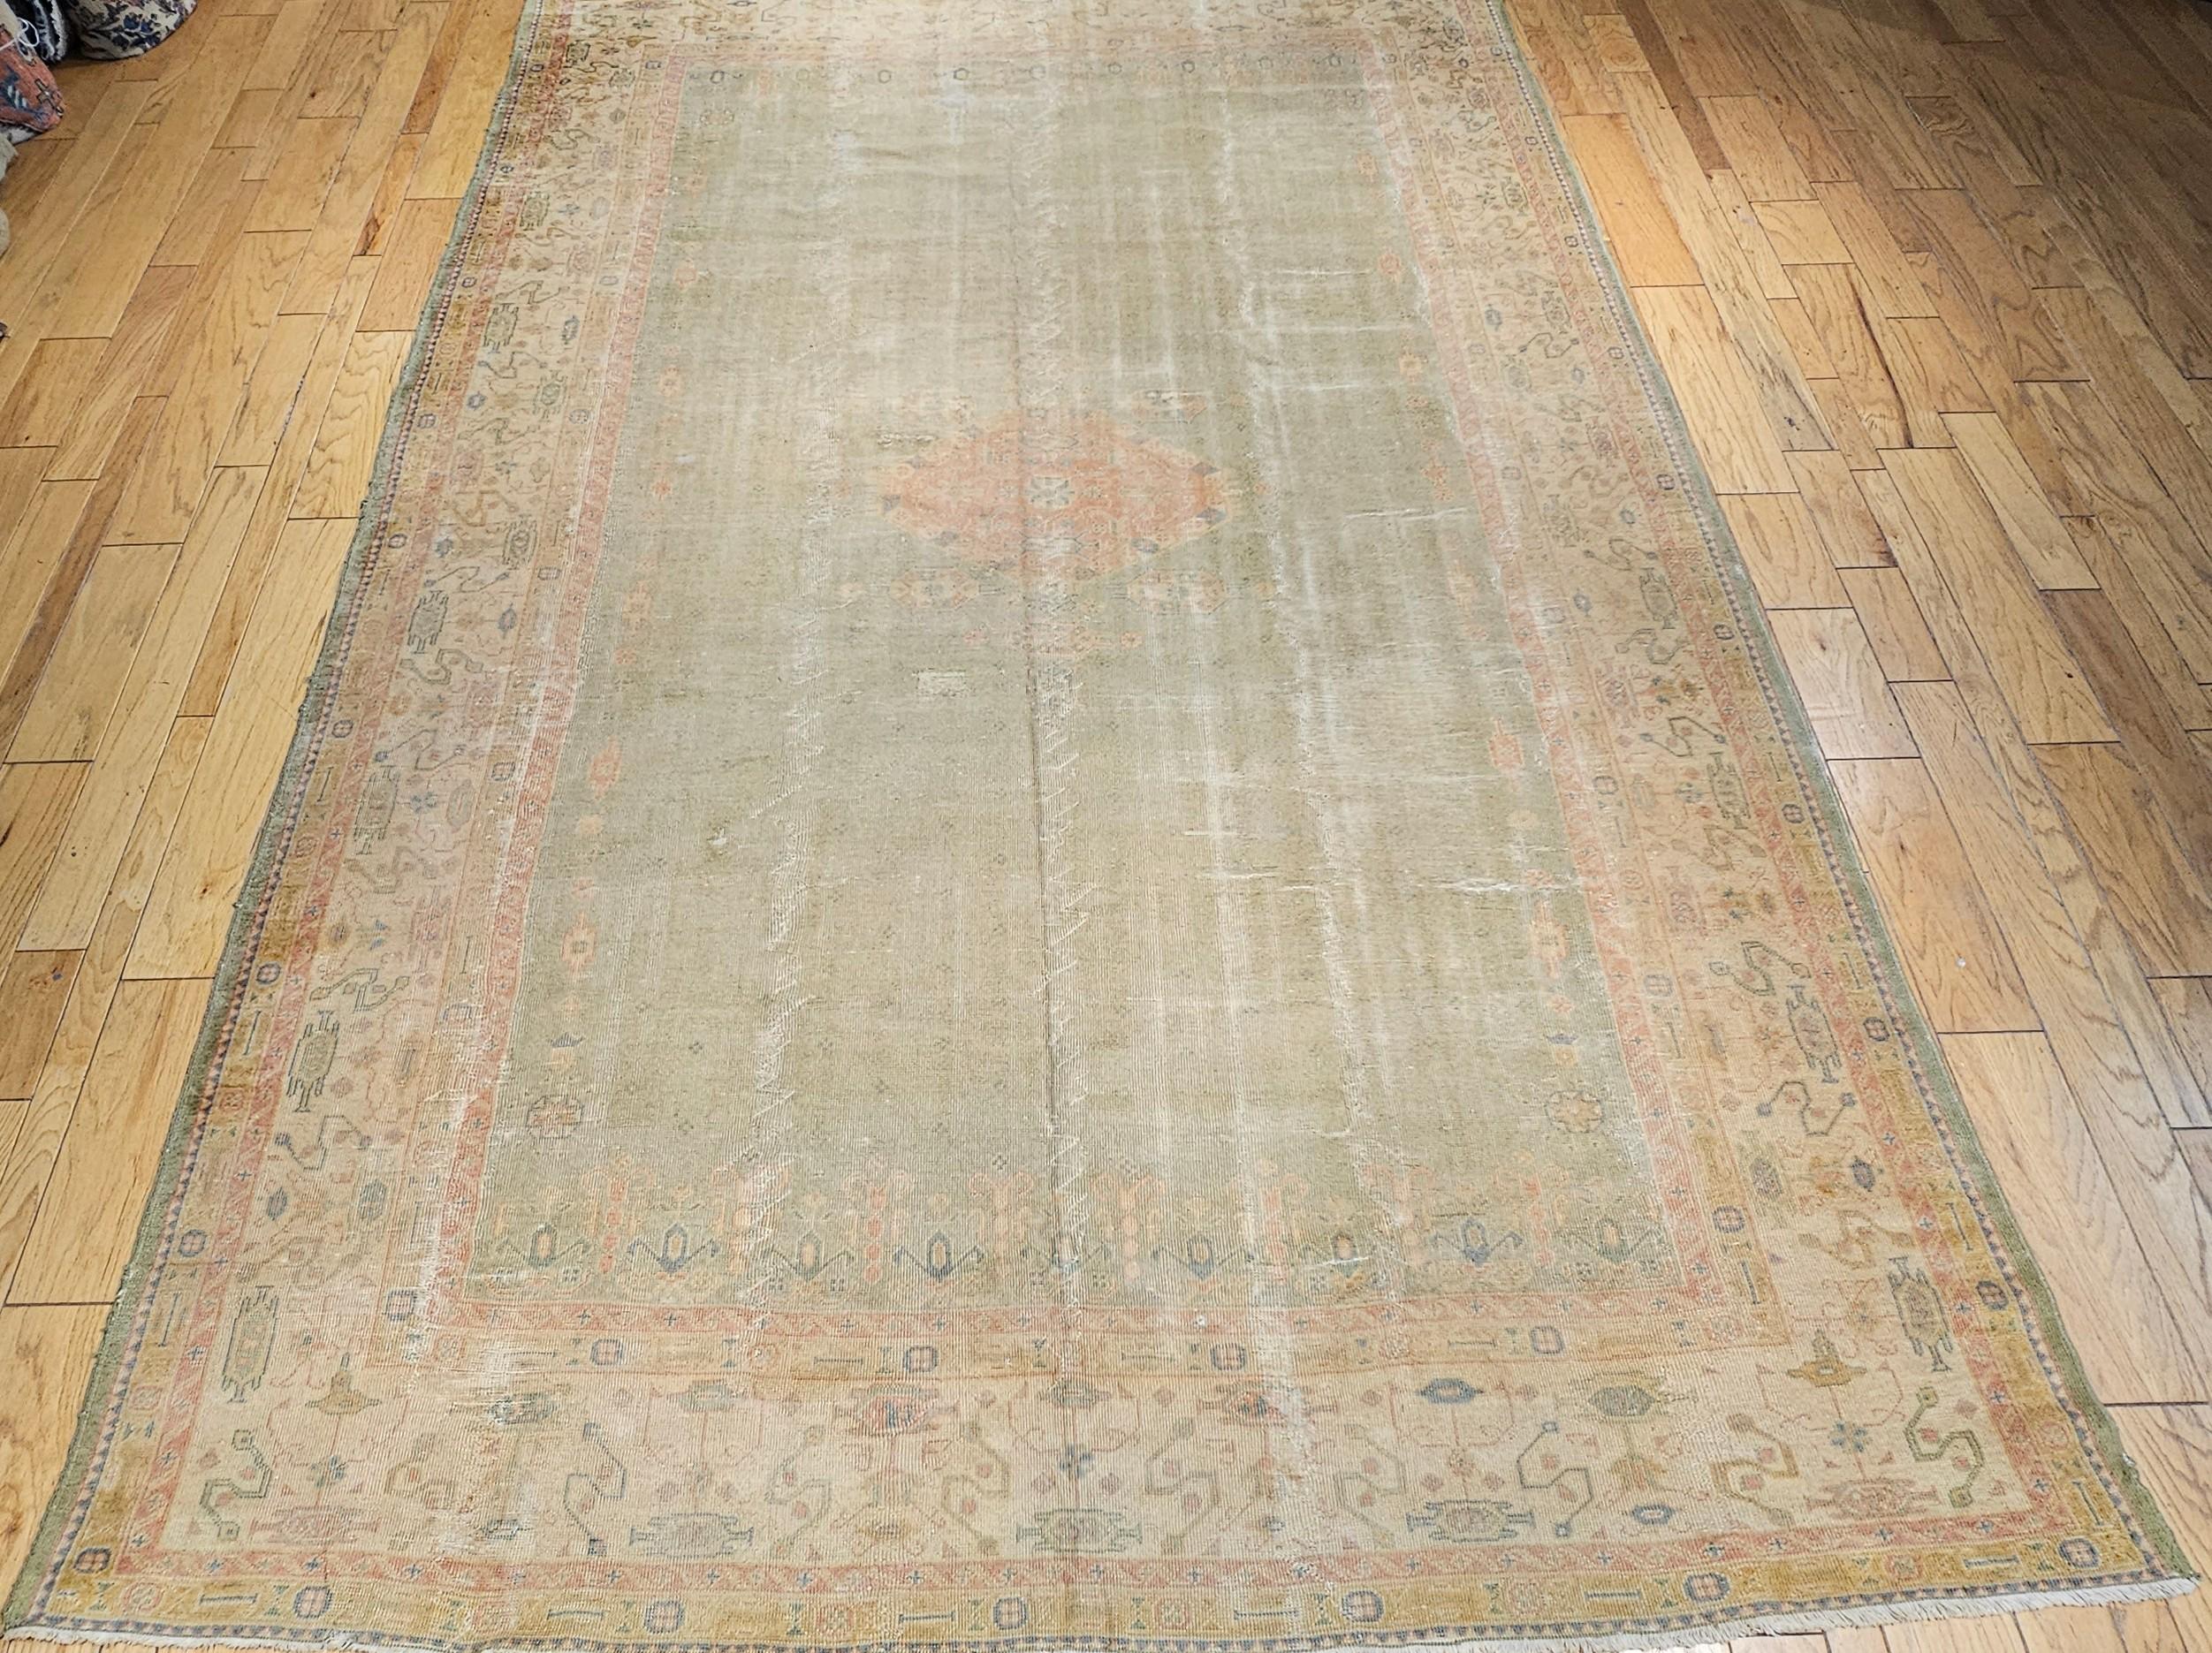 Vintage room size Turkish Oushak in an open geometric pattern in pale green, yellow, and pink colors from the early 20th century. The rug has an all-over design with a very small central medallion set in a pale green color field with geometric